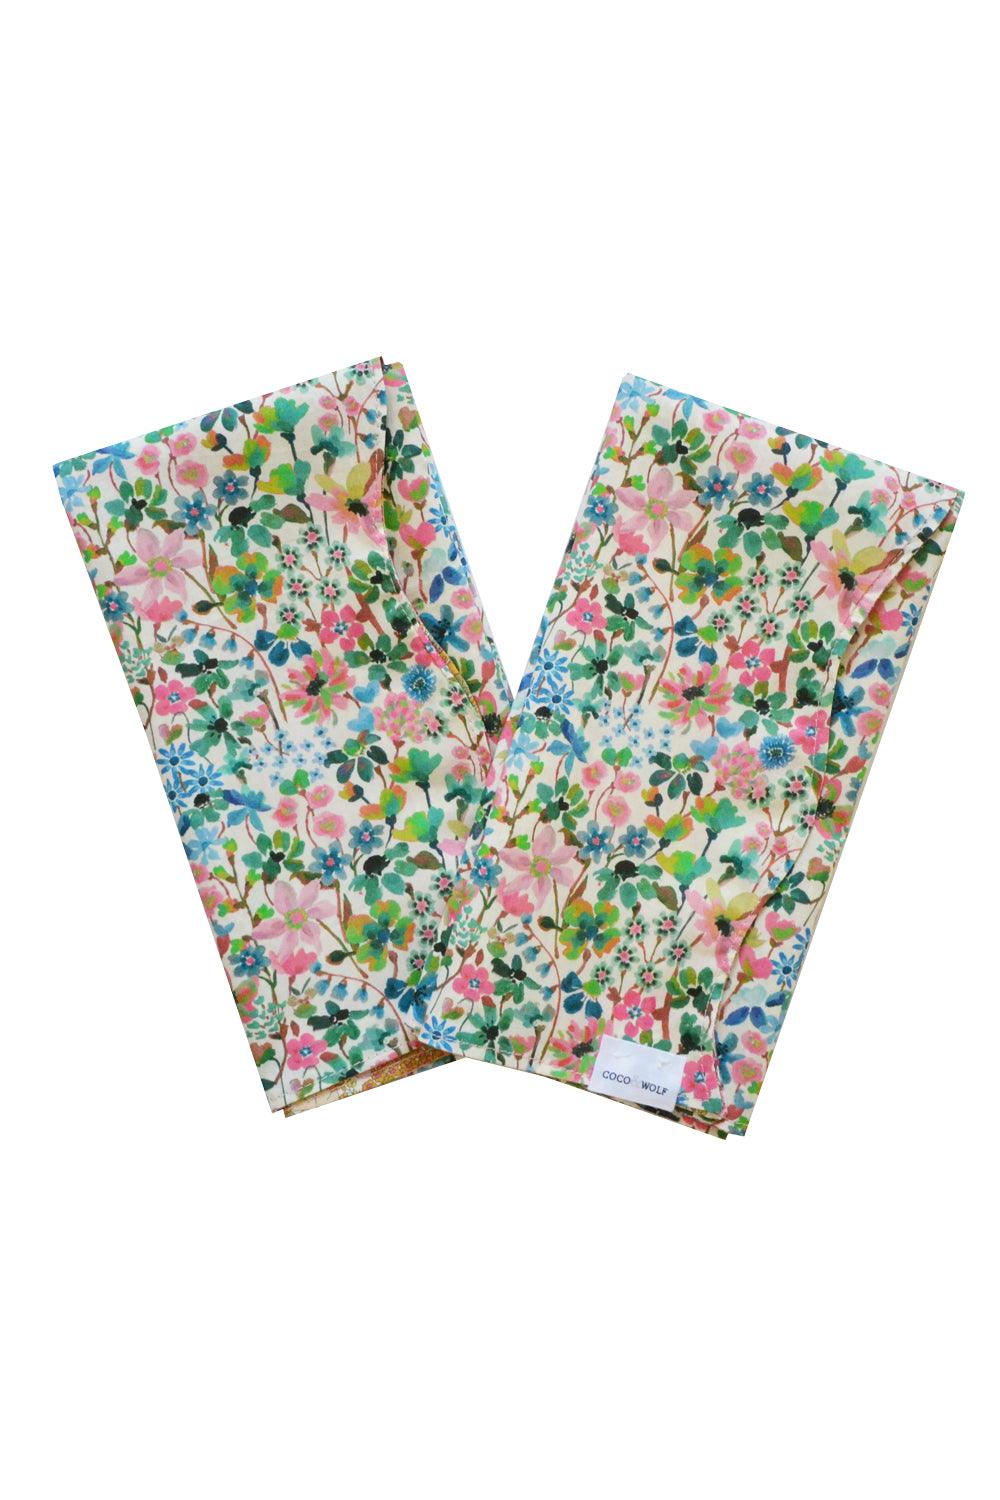 Reversible Wavy Napkin Set made with Liberty Fabric DREAMS OF SUMMER - Coco & Wolf